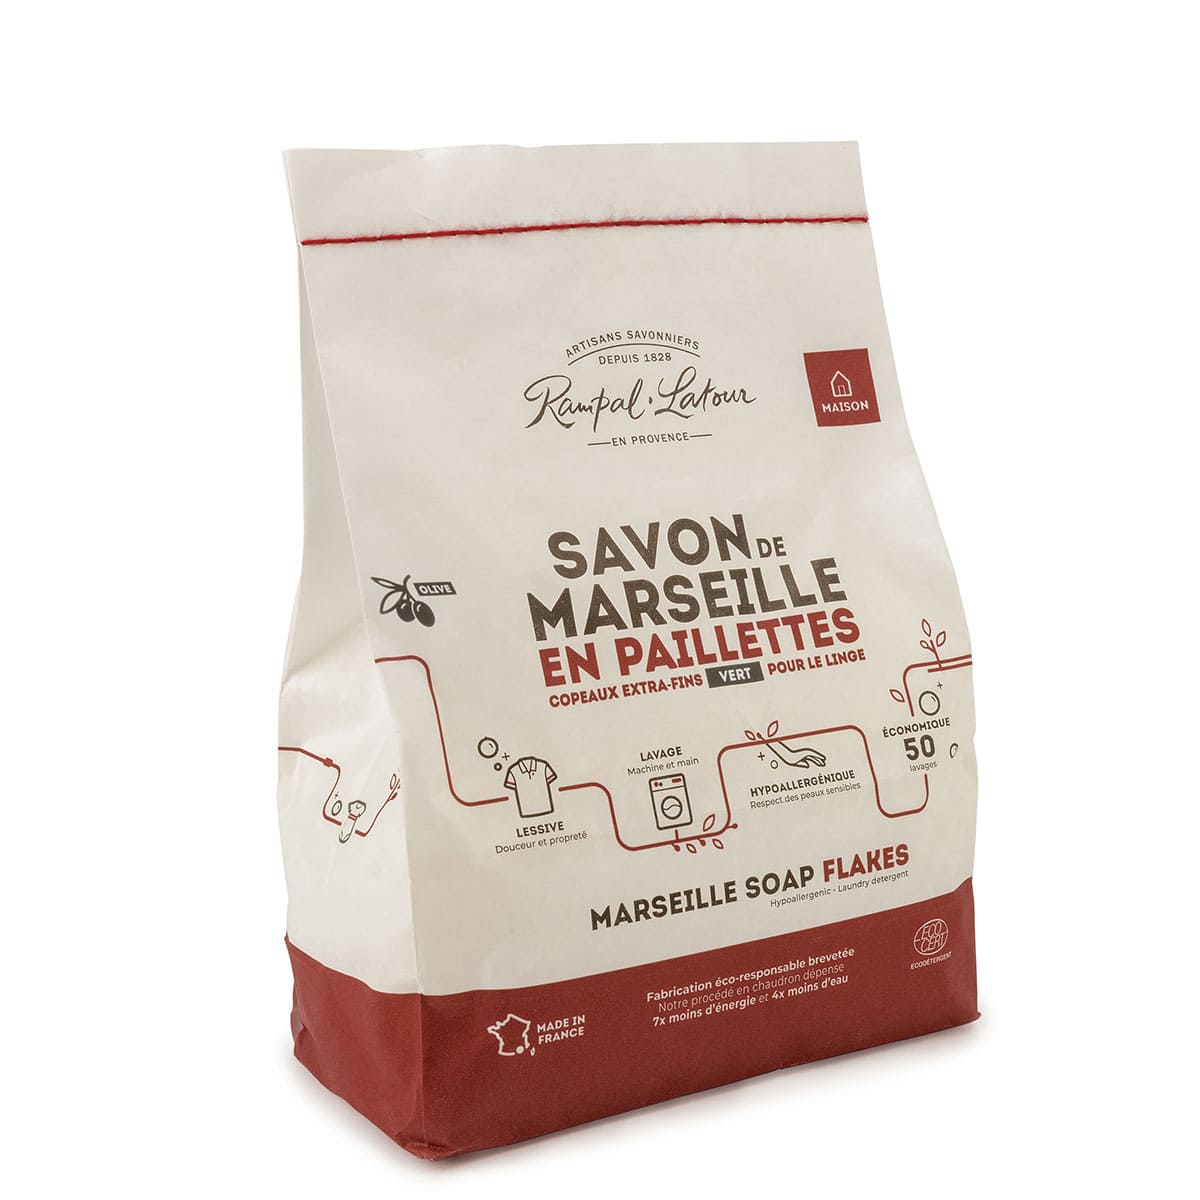 Marseille soap shavings with olive oil for laundry 750g - Ecodetergent